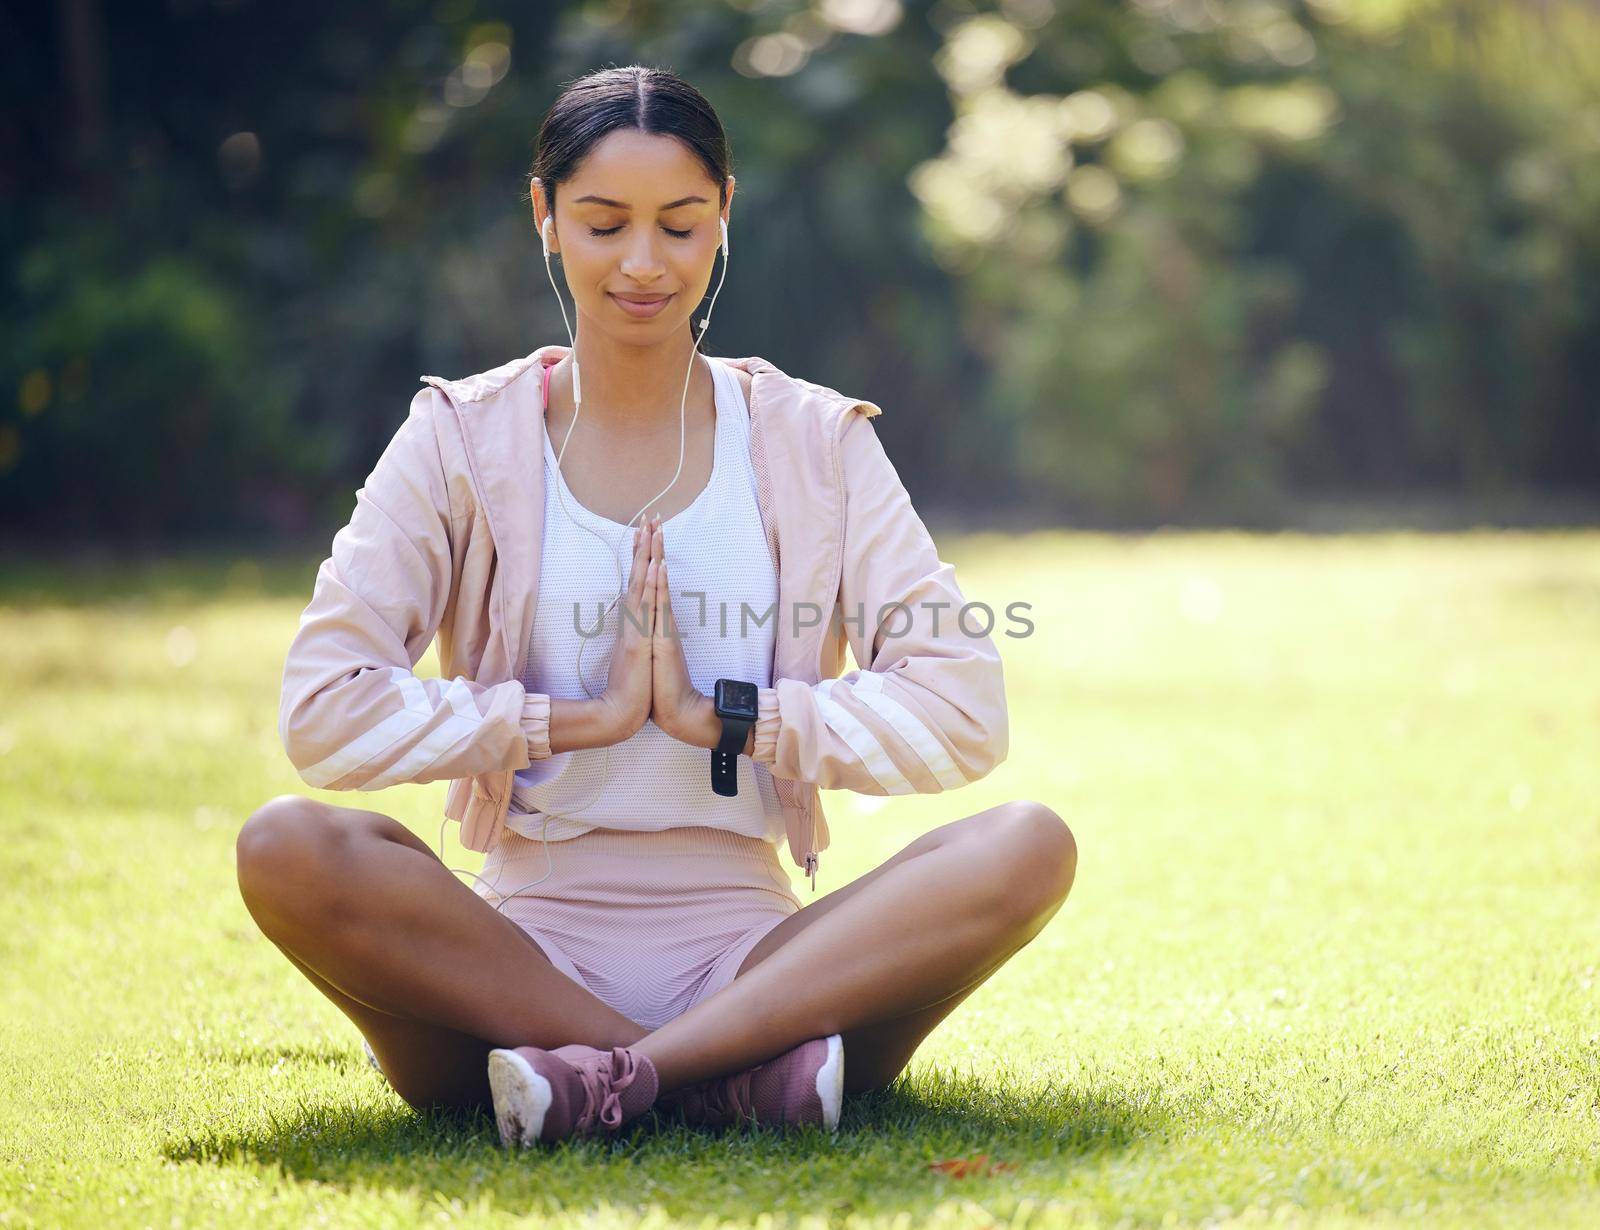 Peace is attainable through focus. a sporty young woman meditating while exercising outdoors